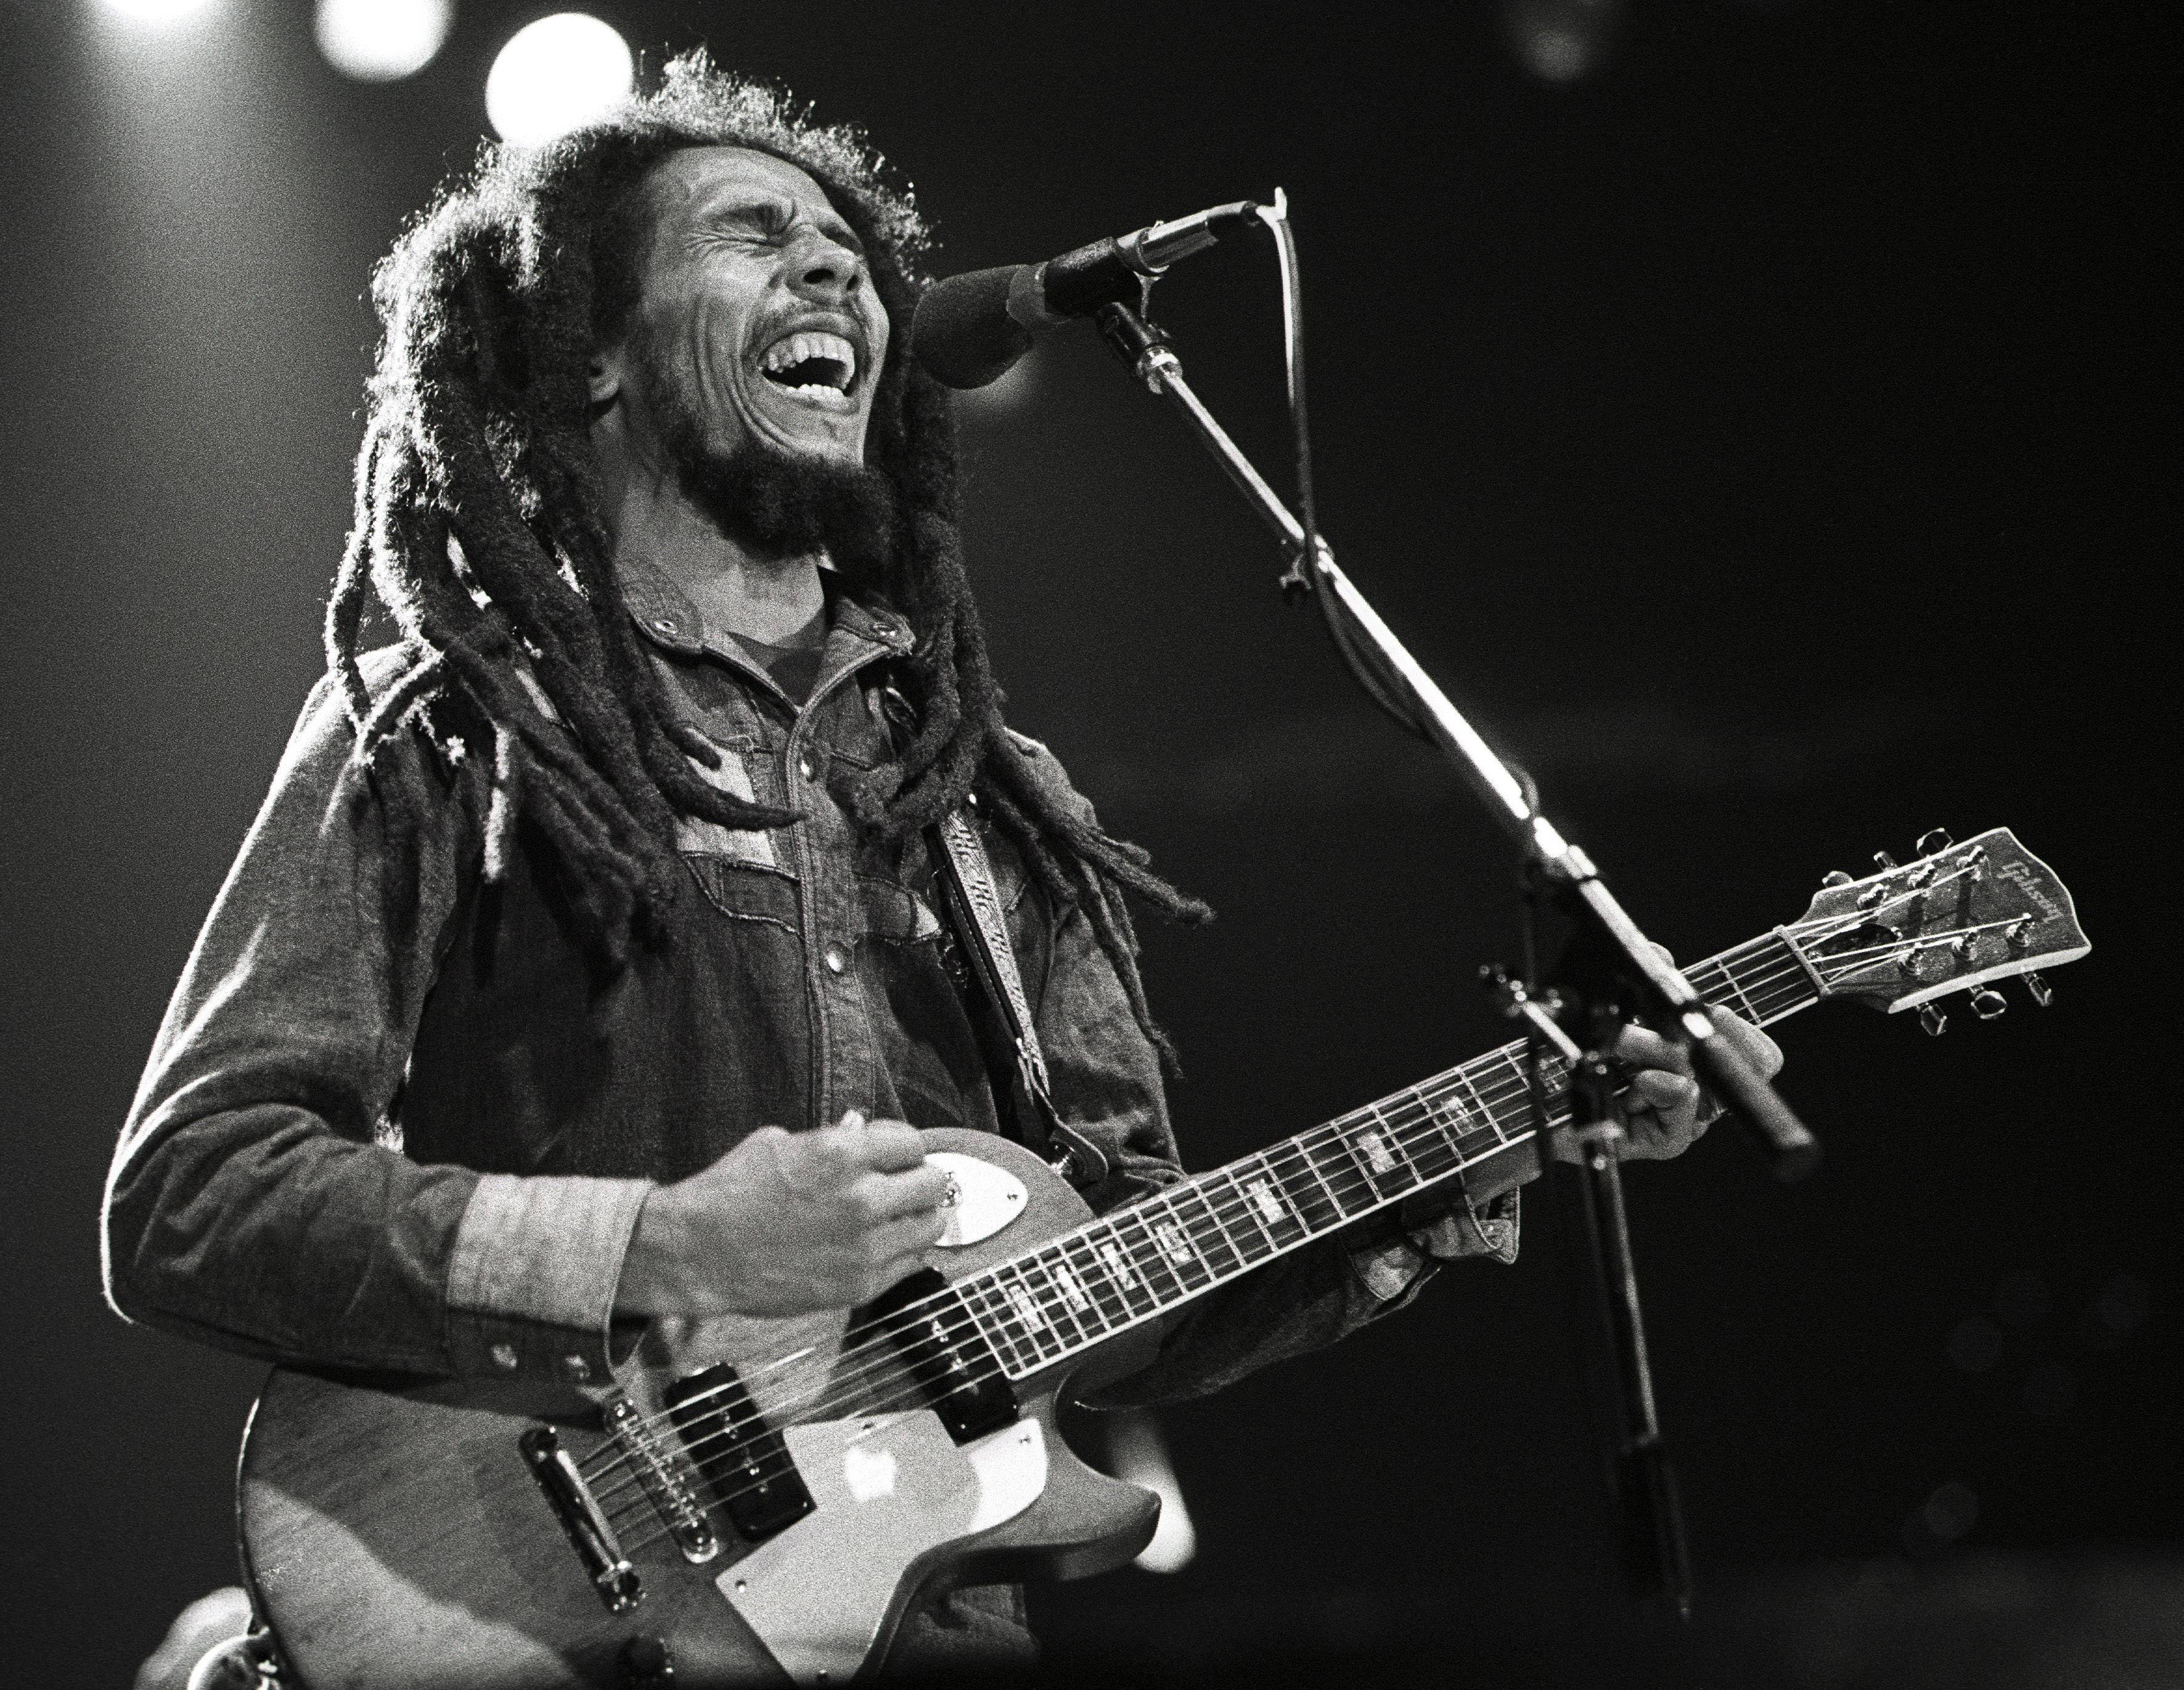 NETHERLANDS - JUNE 23:  AHOY  Photo of Bob MARLEY, Bob Marley performing on stage  (Photo by Rob Verhorst/Redferns)